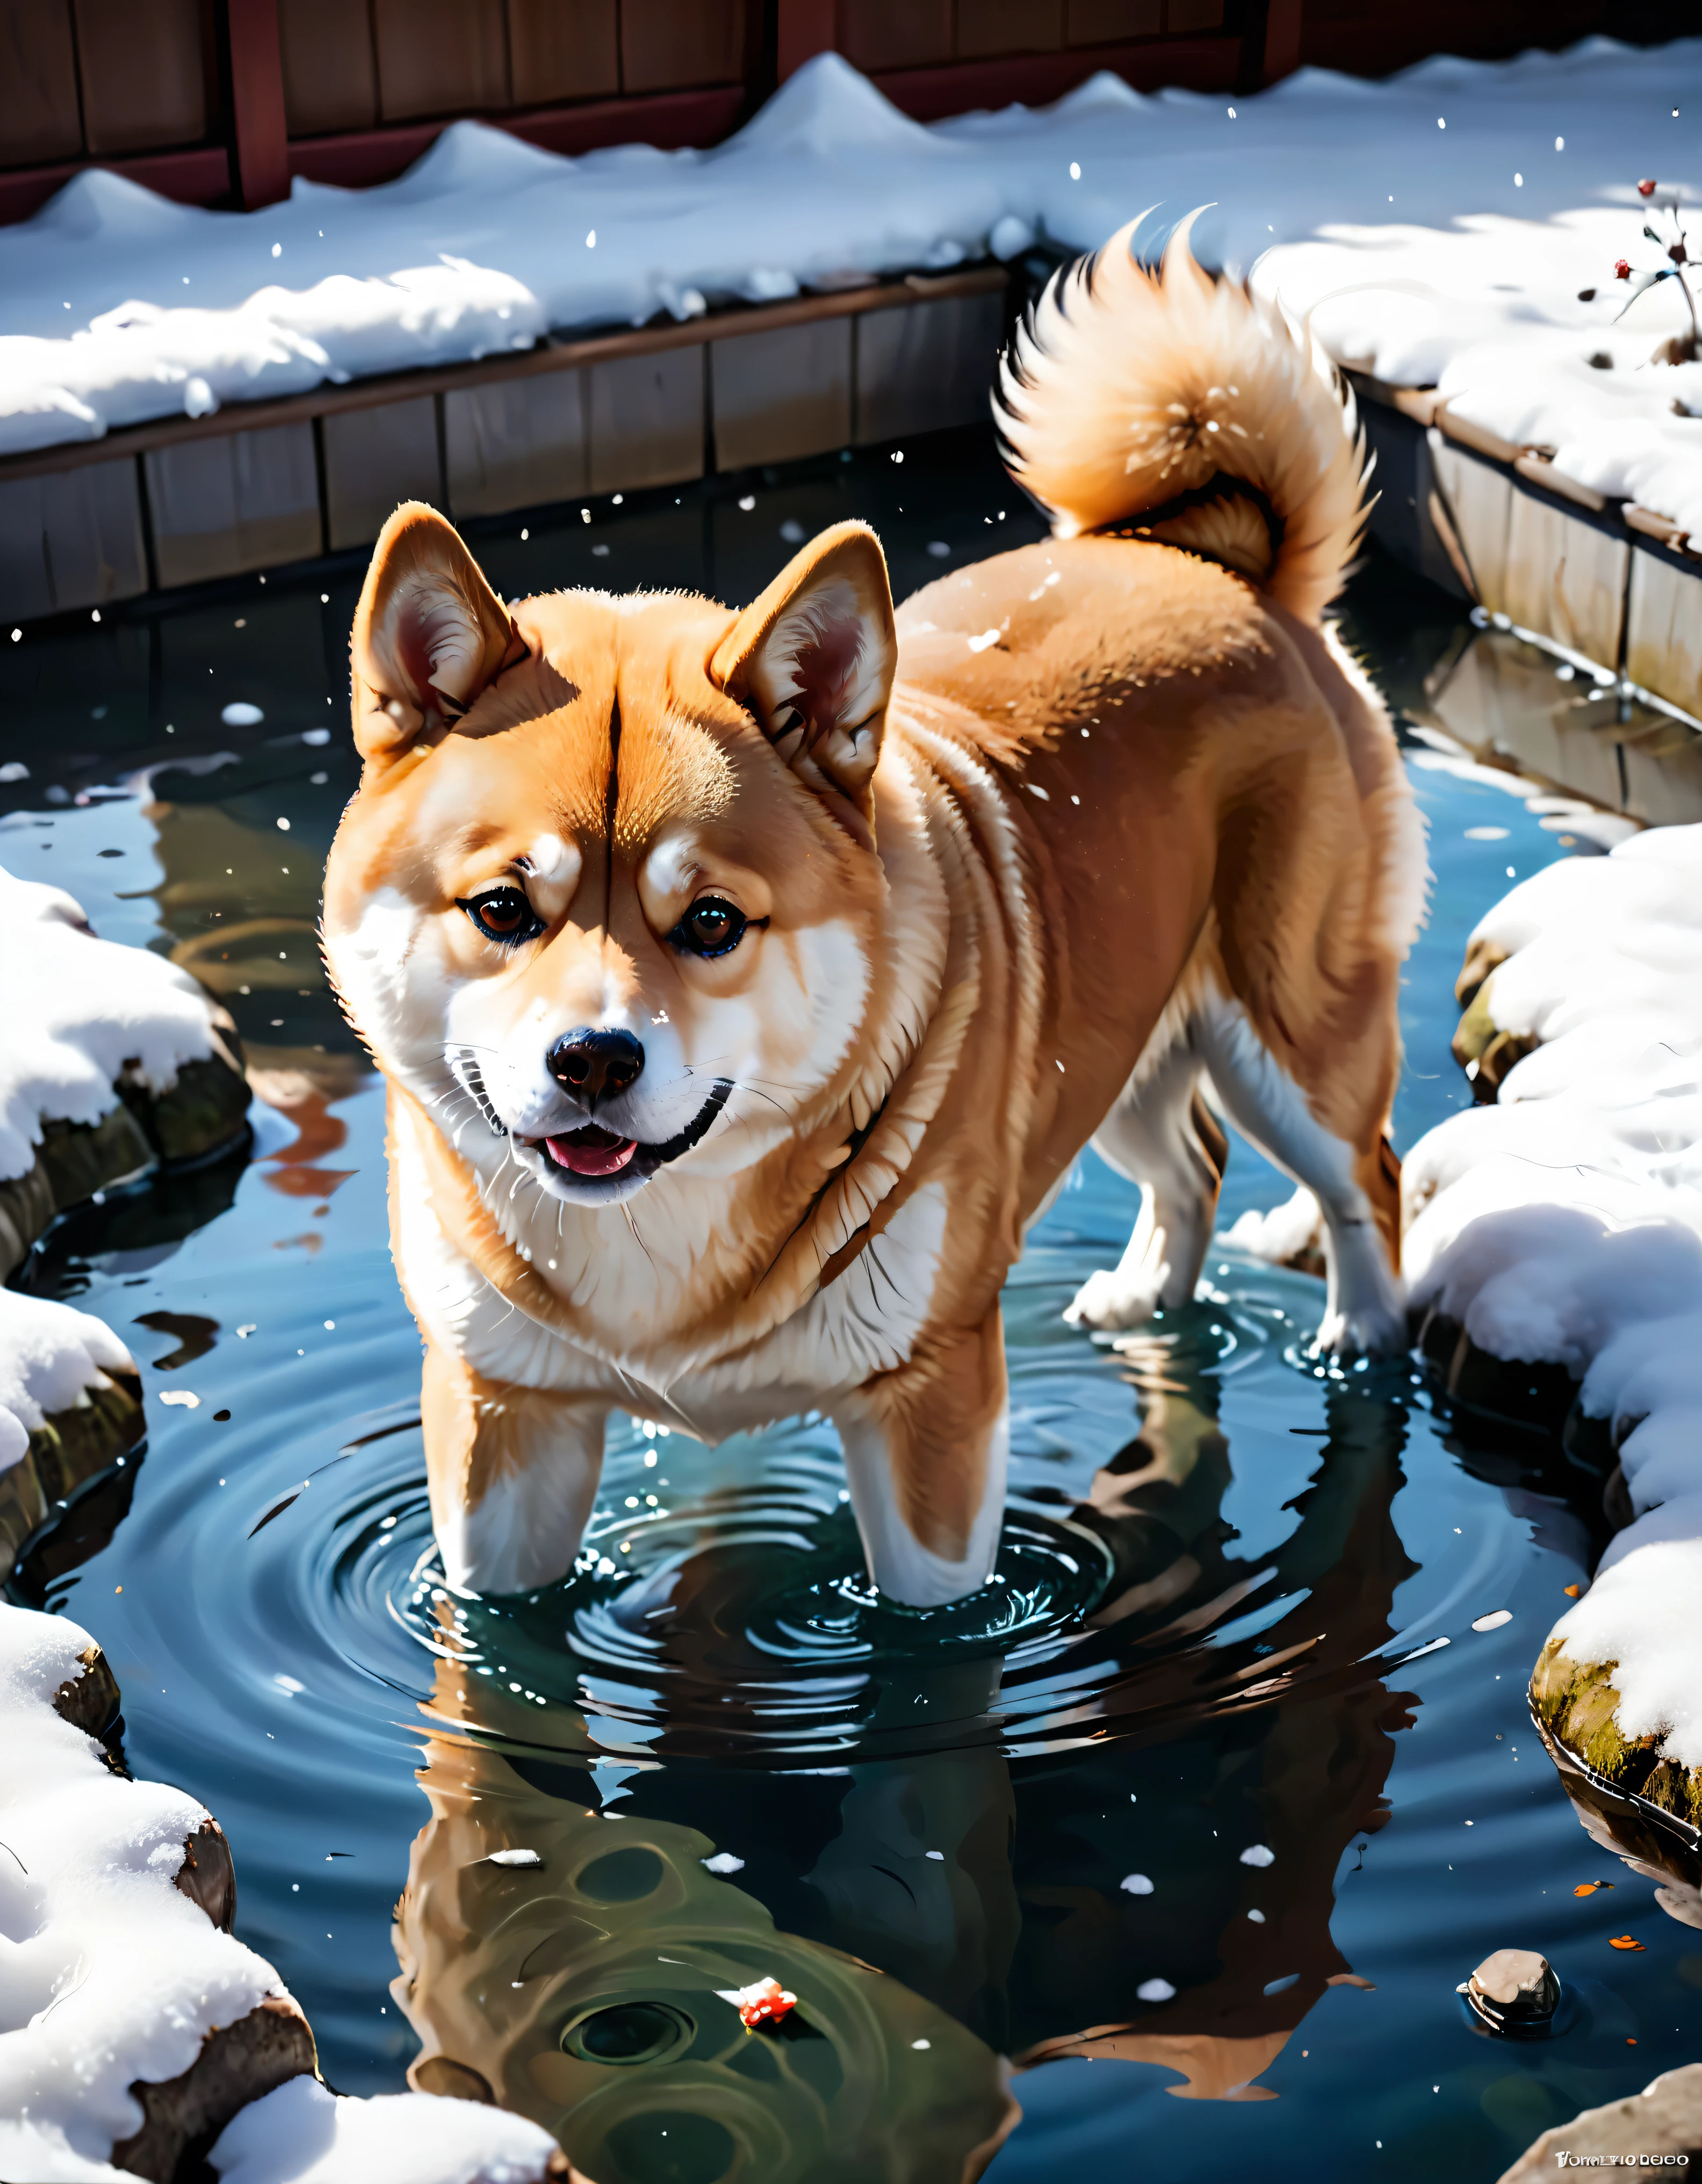 ((soft_color_painting:)1.5), ((soft_color_tones):1.4), ((crystal clear water reflection background):1.3), ((soft color cute shiba inu):1.4)),((macro view of a steaming japanese spa in snowy winter):1.2),((Movie-like still images and dynamic angles):1.3), ((cool and beautiful shadow silhouette):1.1), Gouache with intricate details, Add a touch of realism to this visually detailed and stylistically diverse masterpiece, Detailed brushstrokes have been enhanced, Careful brushwork creates an atmosphere, Utilize delicate yet powerful brushstroke techniques, Create an enchanting atmosphere. highly detailed gouache, ((Unparalleled sharpness and clarity):1.1), ((Radiosity rendered in stunning 32K resolution):1.3), All captured with sharp focus. Rendered in ultra-high definition with UHD and retina quality, this masterpiece ensures anatomical correctness and textured skin with super detail. With a focus on high quality and accuracy, this award-winning portrayal captures every nuance in stunning 16k resolution, immersing viewers in its lifelike depiction. | ((perfect_composition, perfect_design, perfect_layout, perfect_detail, ultra_detailed)), ((enhance_all, fix_everything)), More Detail, Enhance.